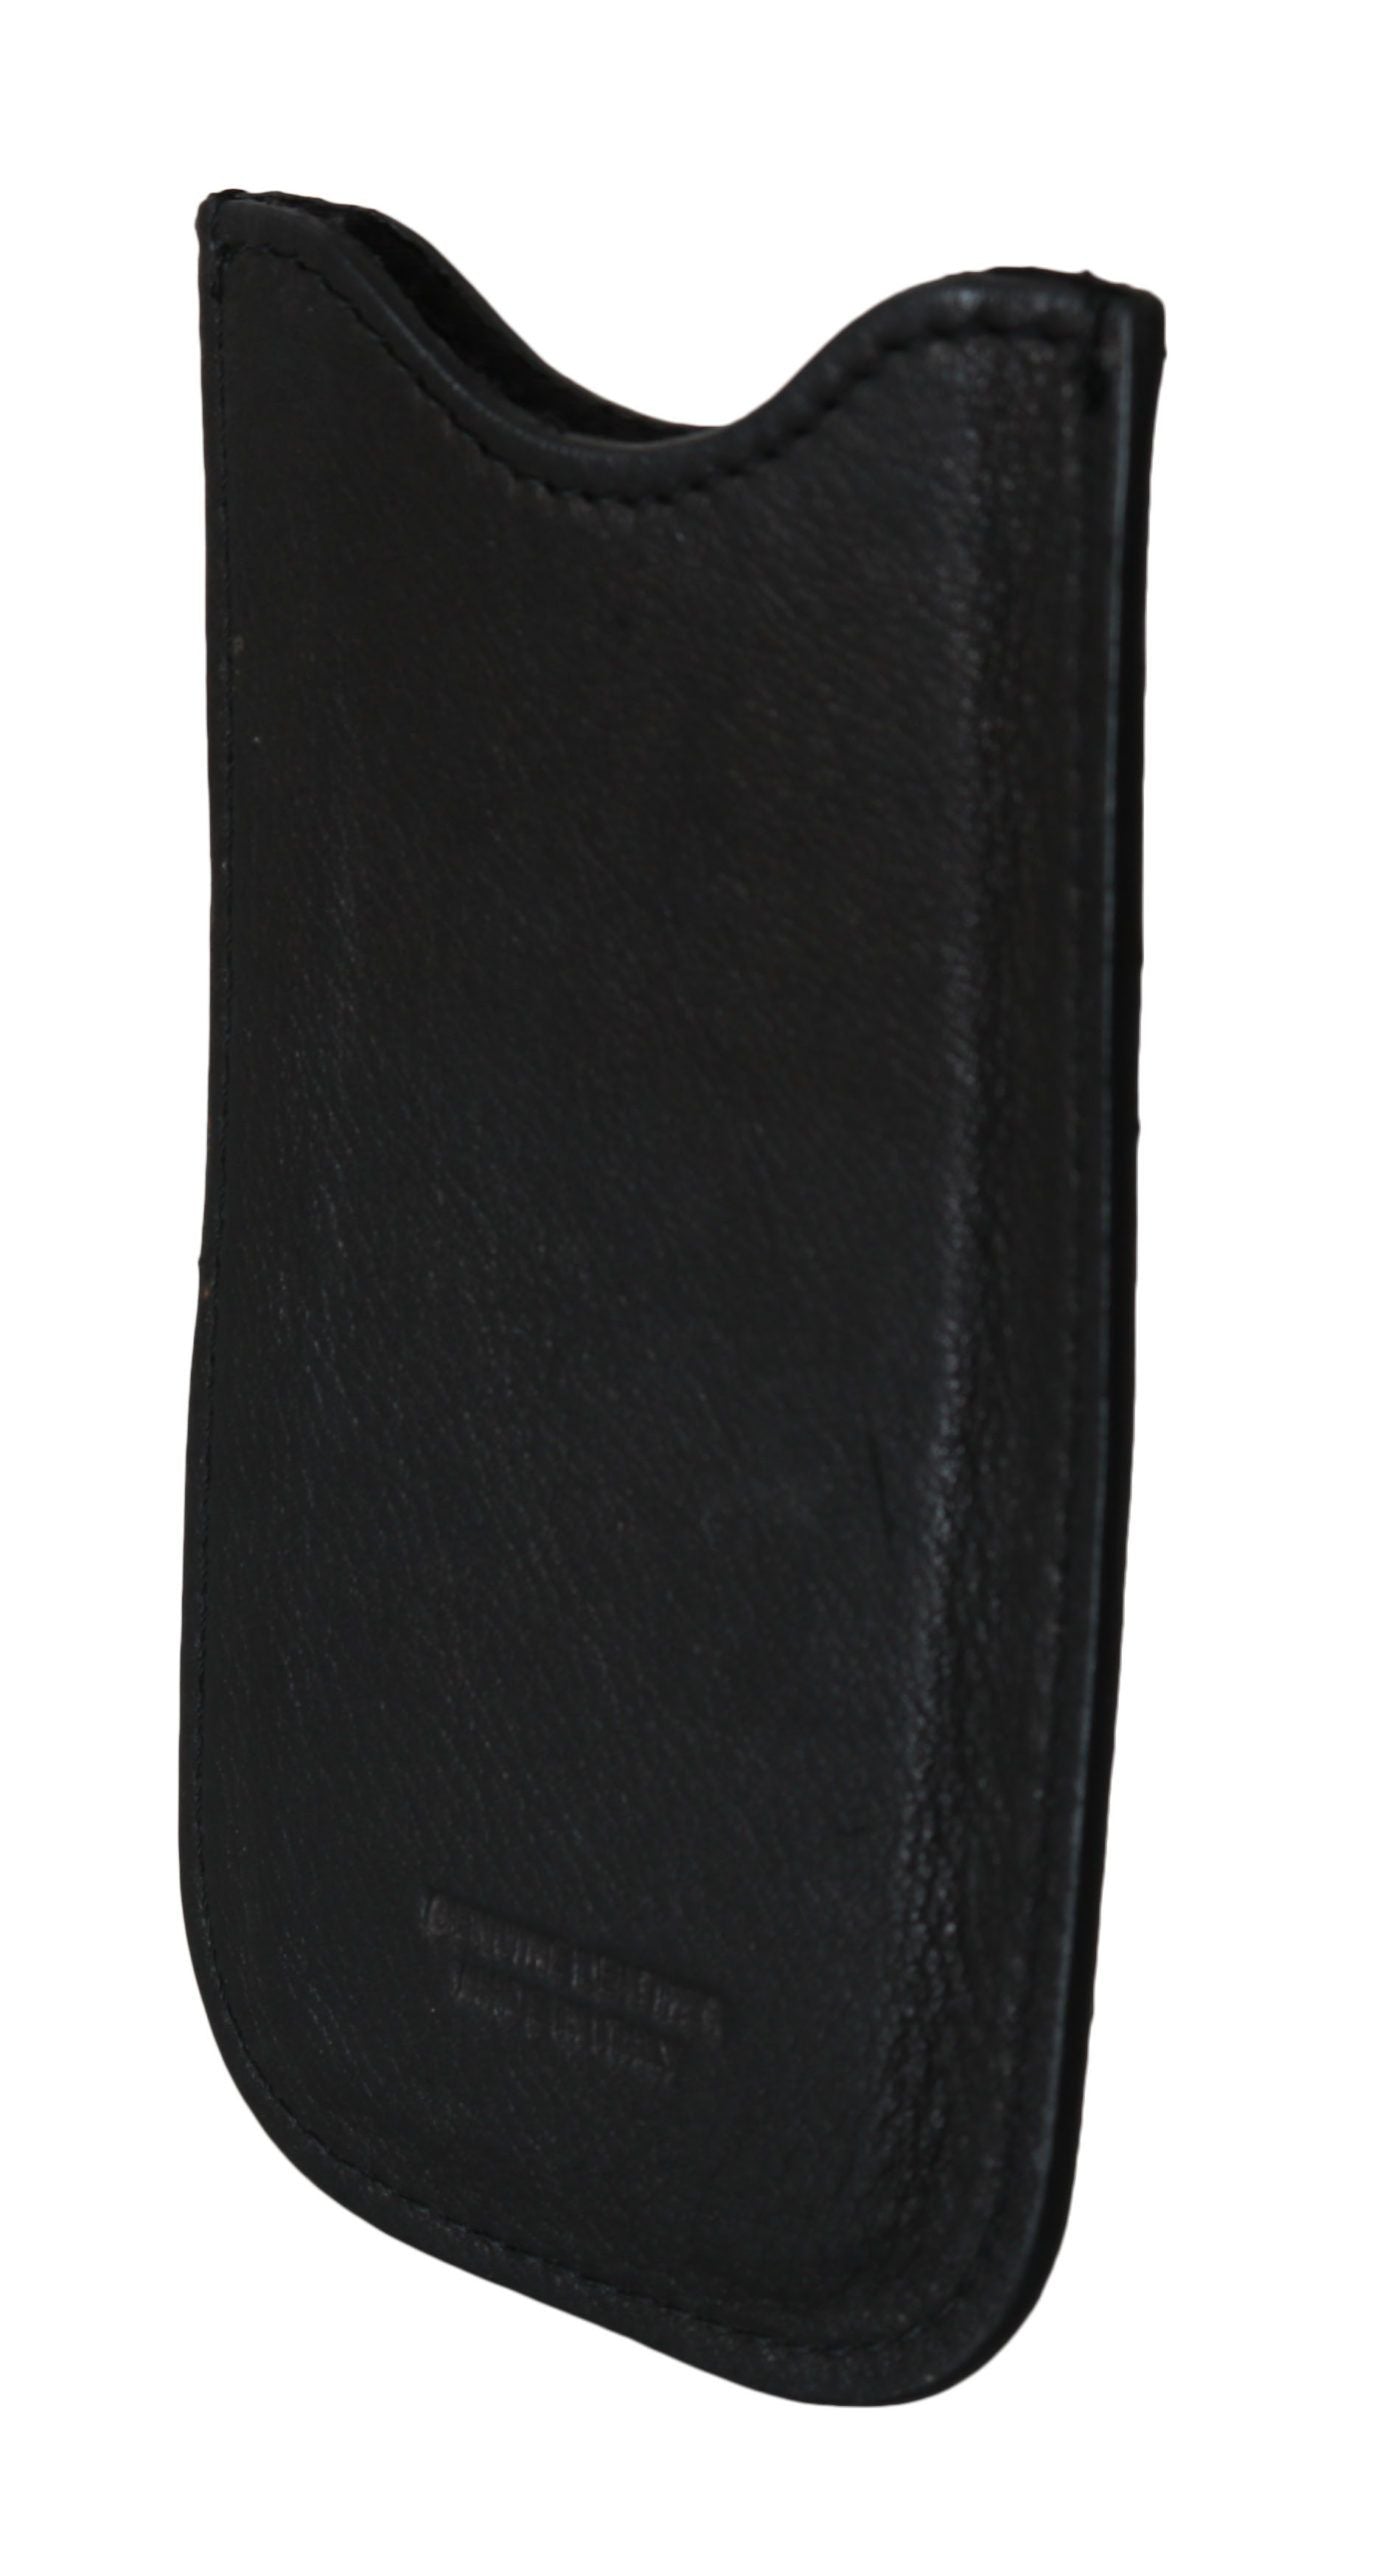 Black Leather Multifunctional Men ID Bill Card Holder Wallet - Designed by John Galliano Available to Buy at a Discounted Price on Moon Behind The Hill Online Designer Discount Store